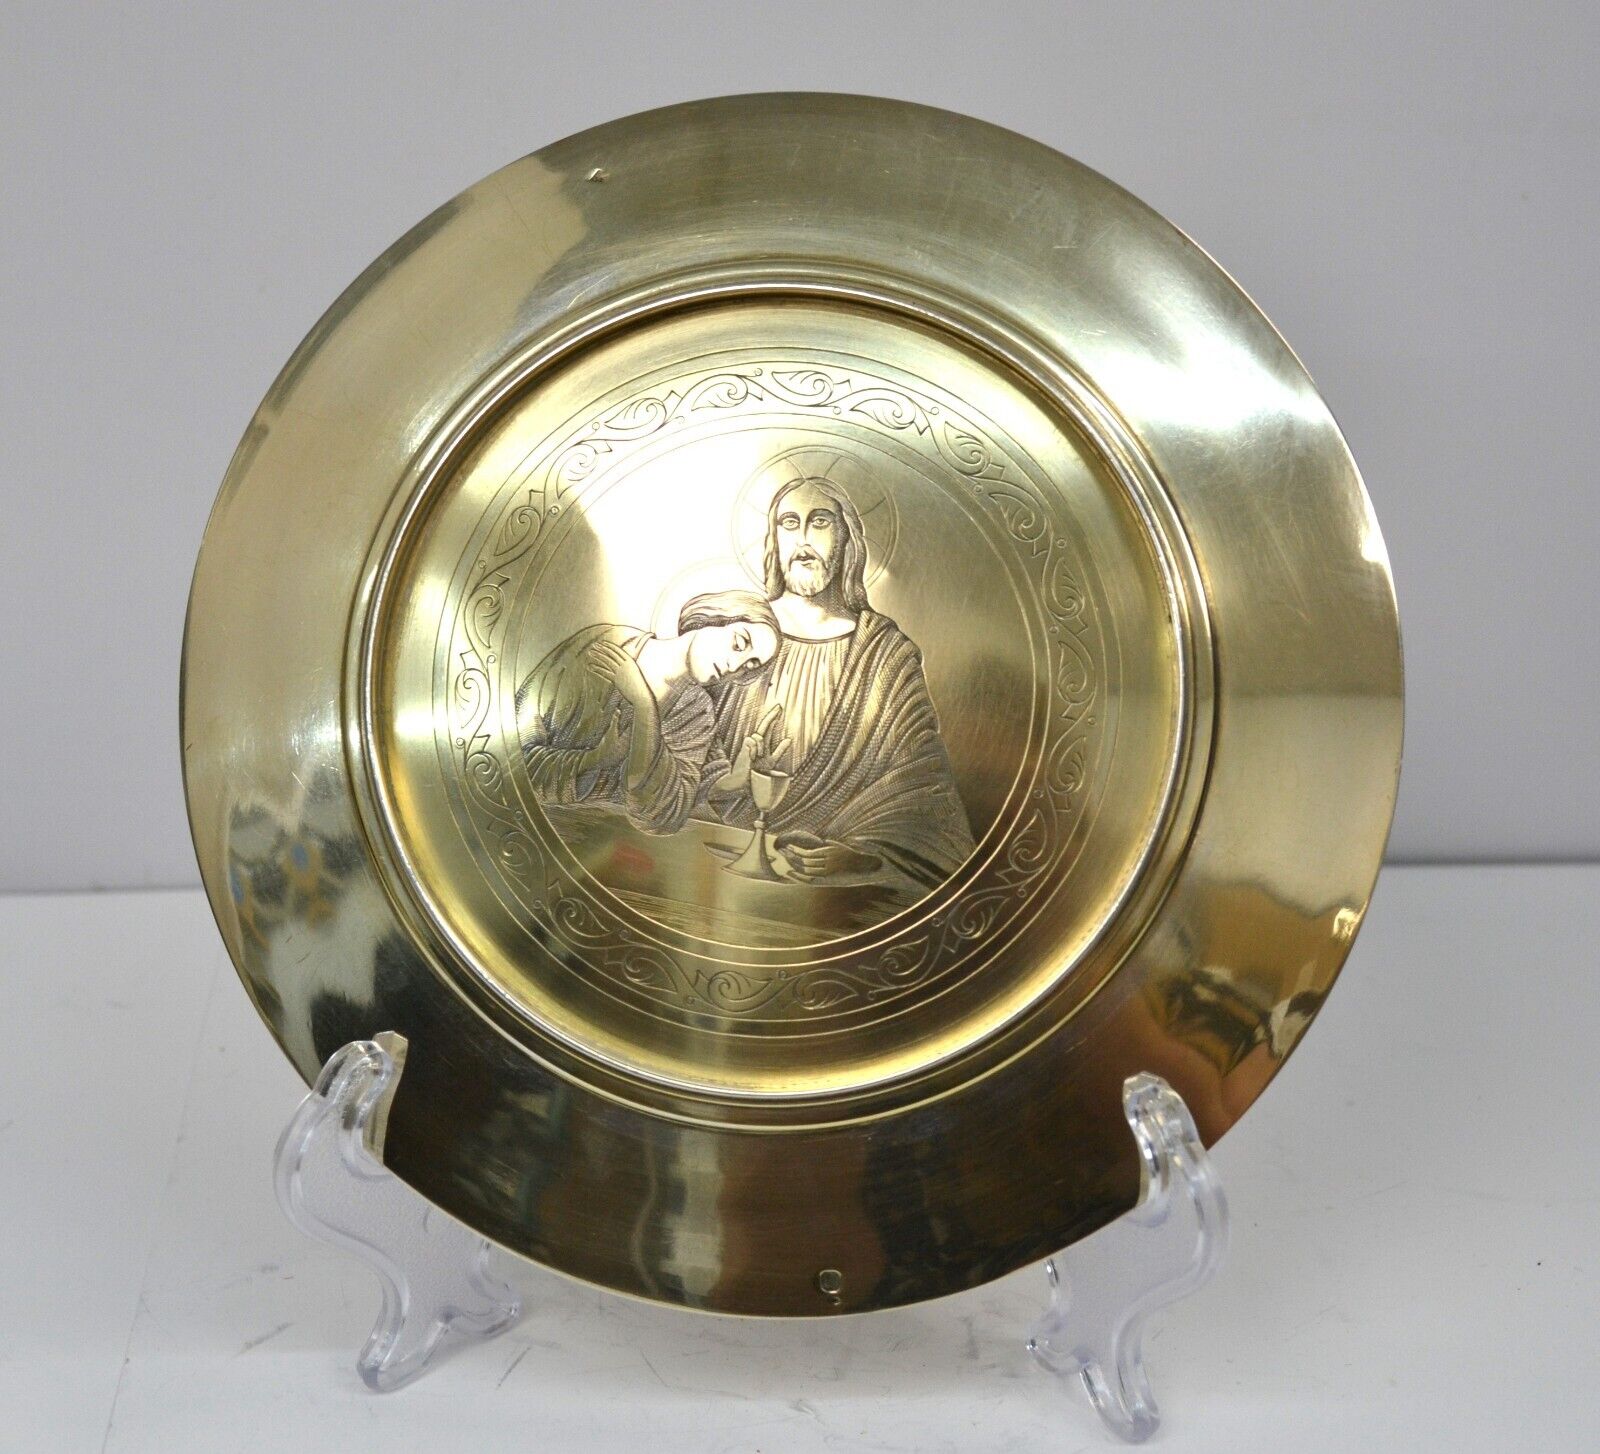 Nice Antique All Sterling Silver Paten for your Chalice, Jesus Communion (PT182)